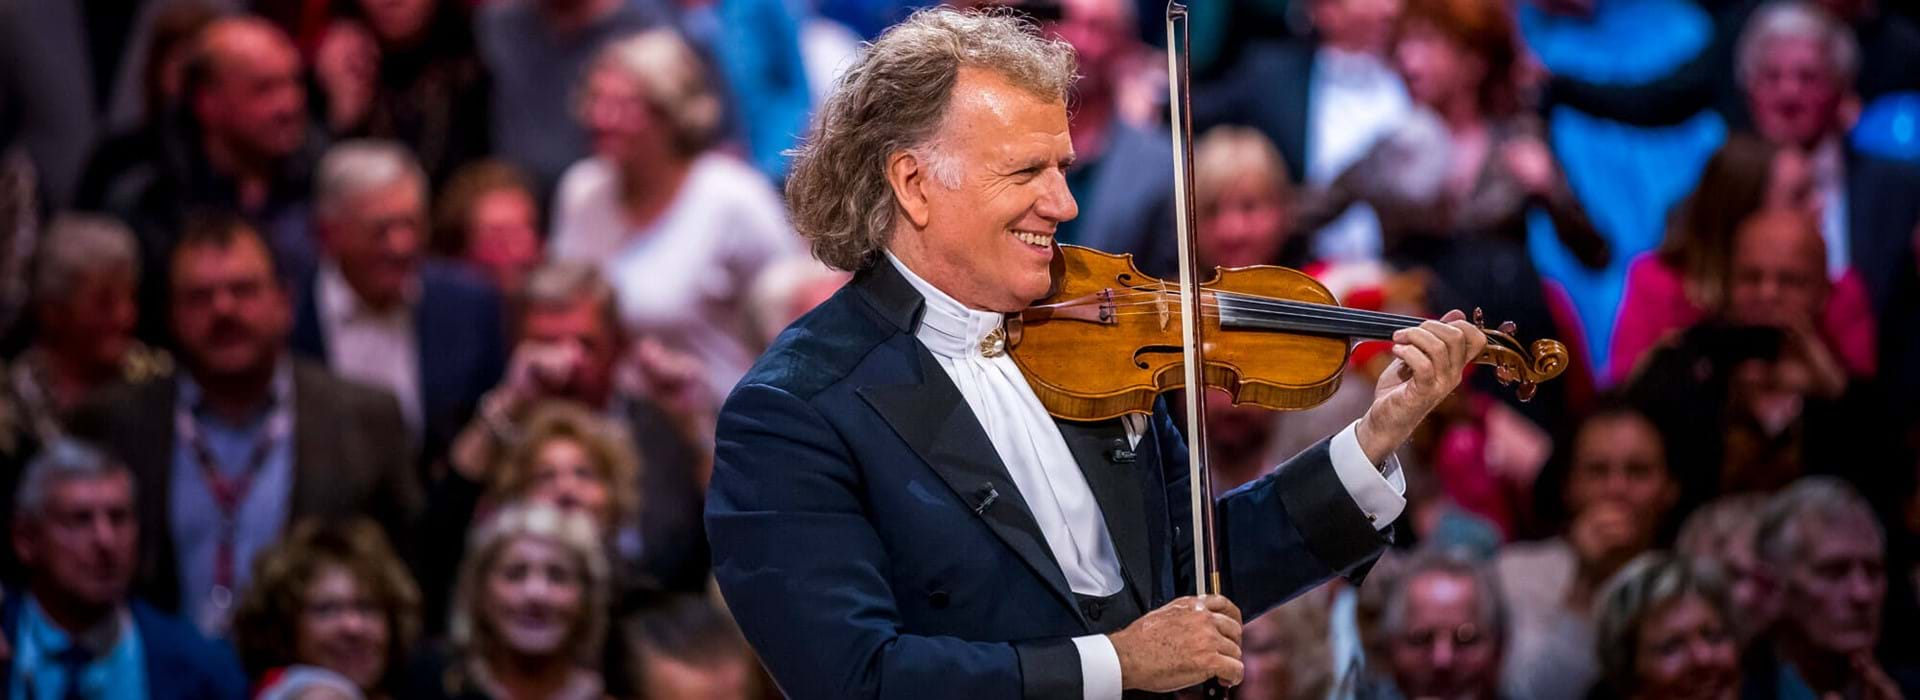 Andre Rieu Christmas Concert in Maastricht by Air 4 days Radio